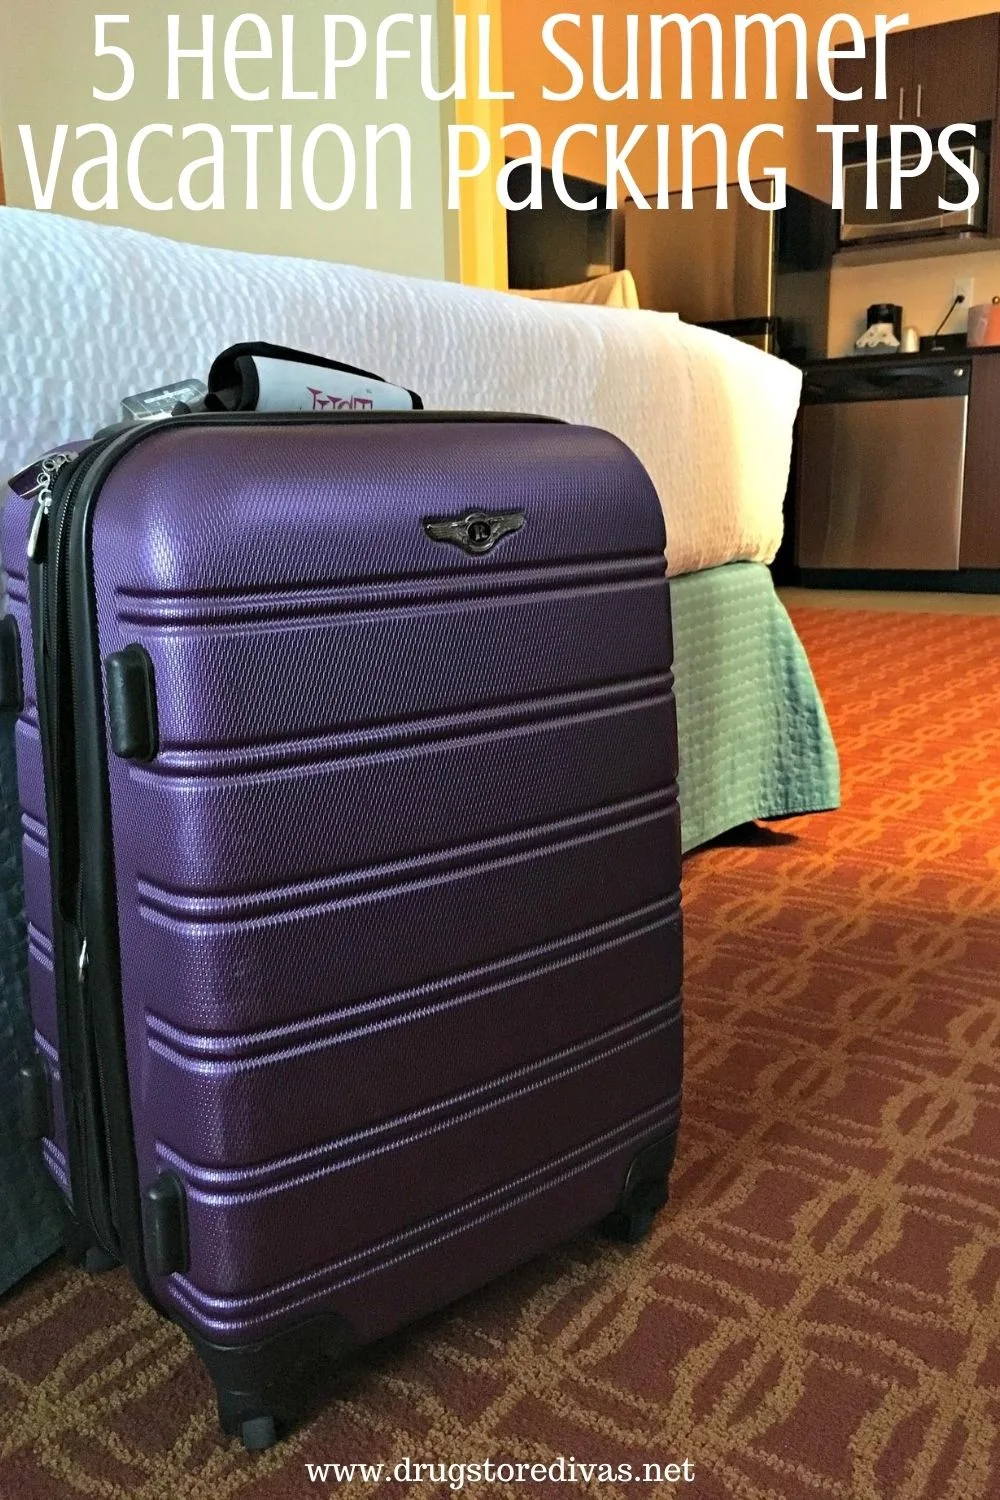 A suitcase in a hotel room with the words 